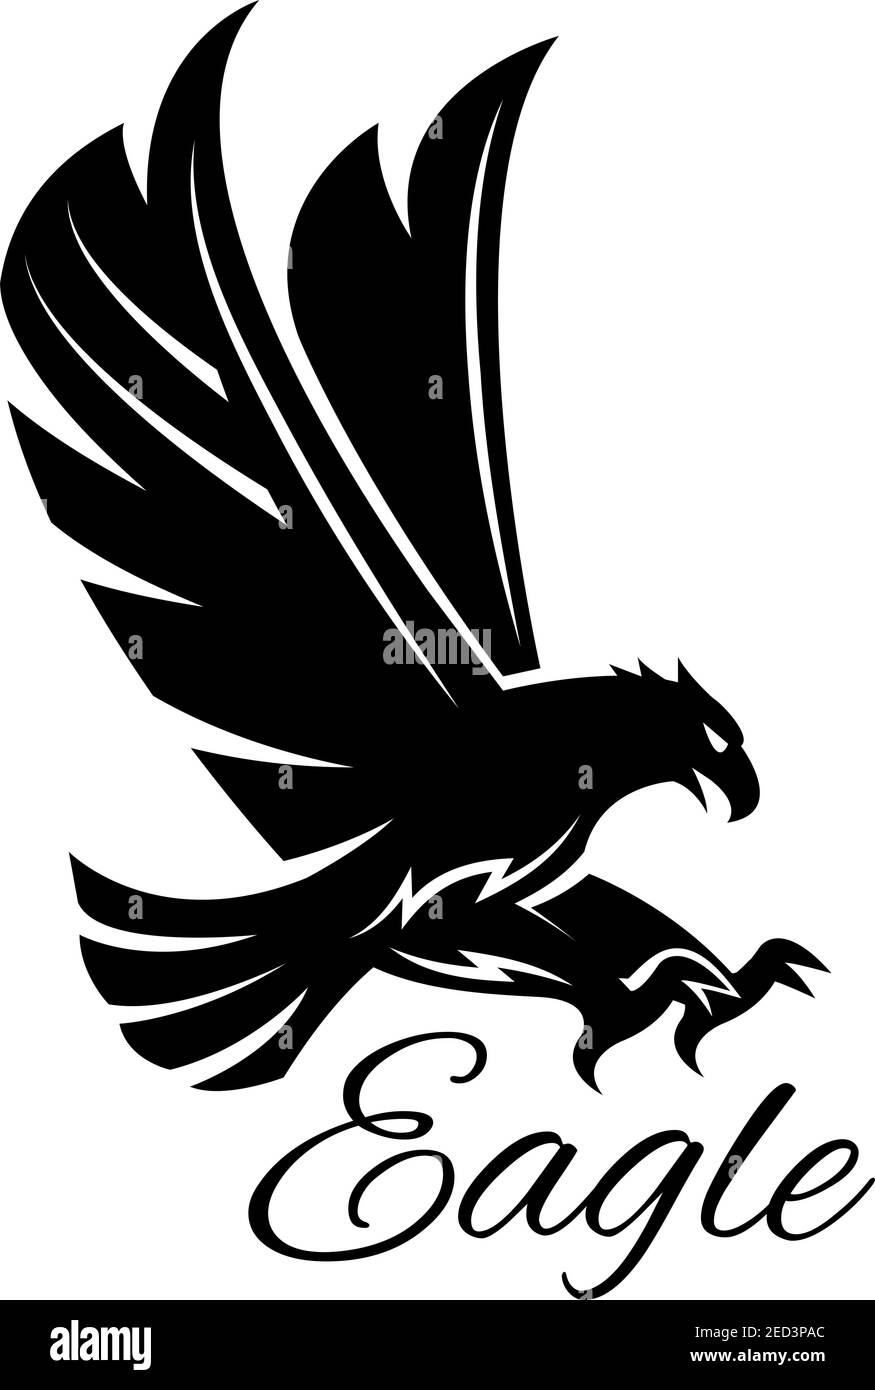 Eagle bird black icon. Vector heraldic emblem of powerful wild falcon with stretching clutches. Symbol of eagle hawk predator for sport team mascot sh Stock Vector